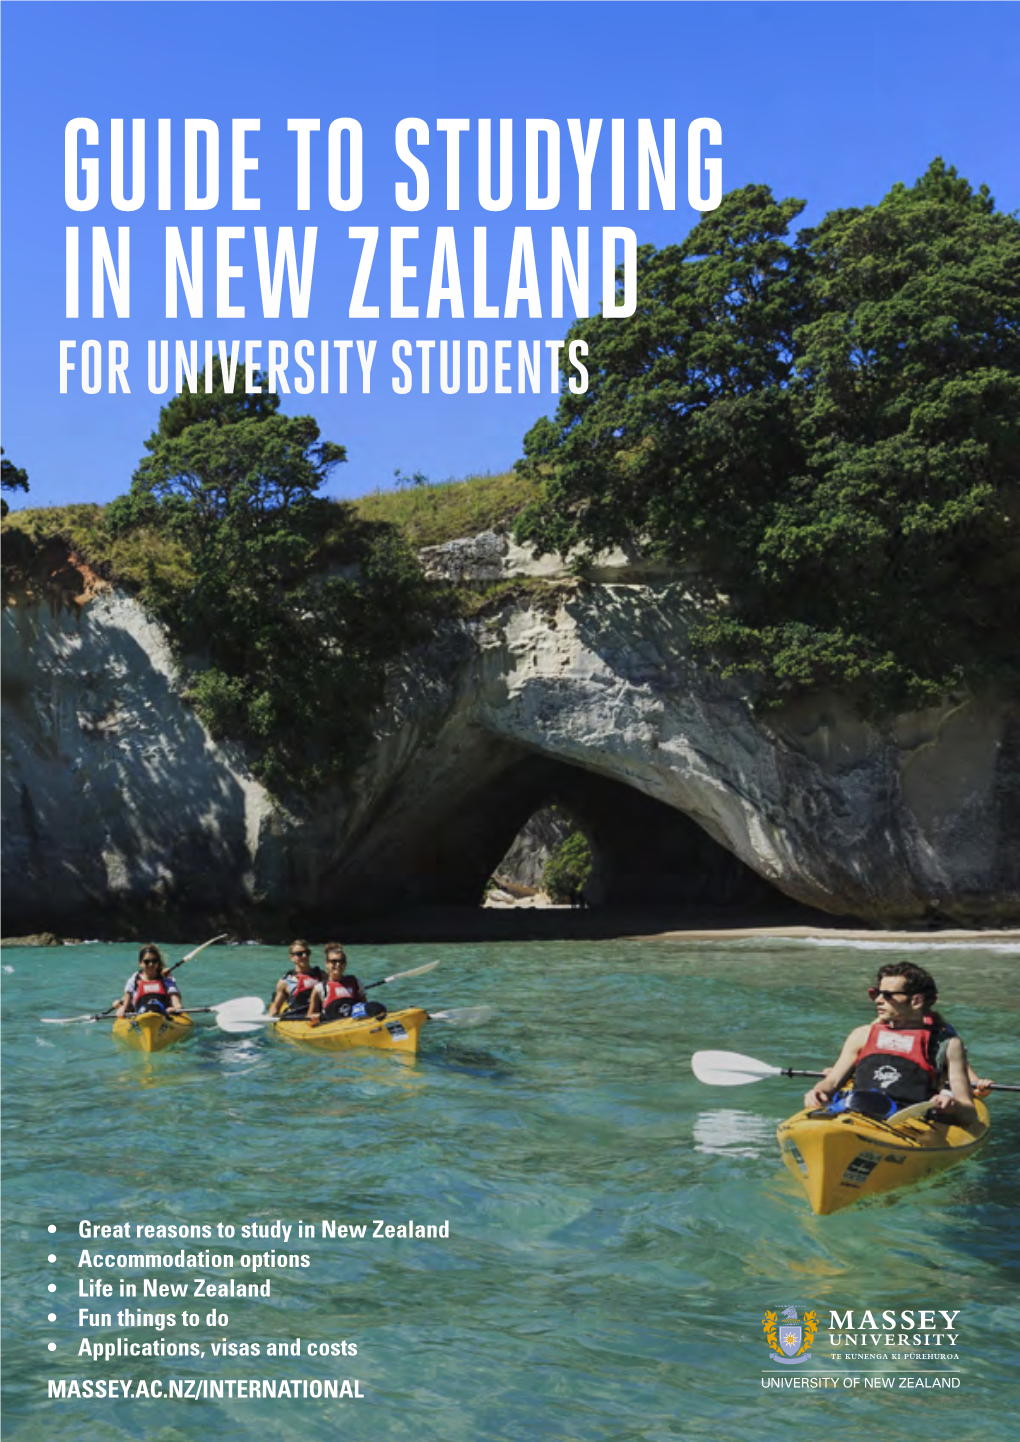 Guide to Studying in New Zealand for University Students